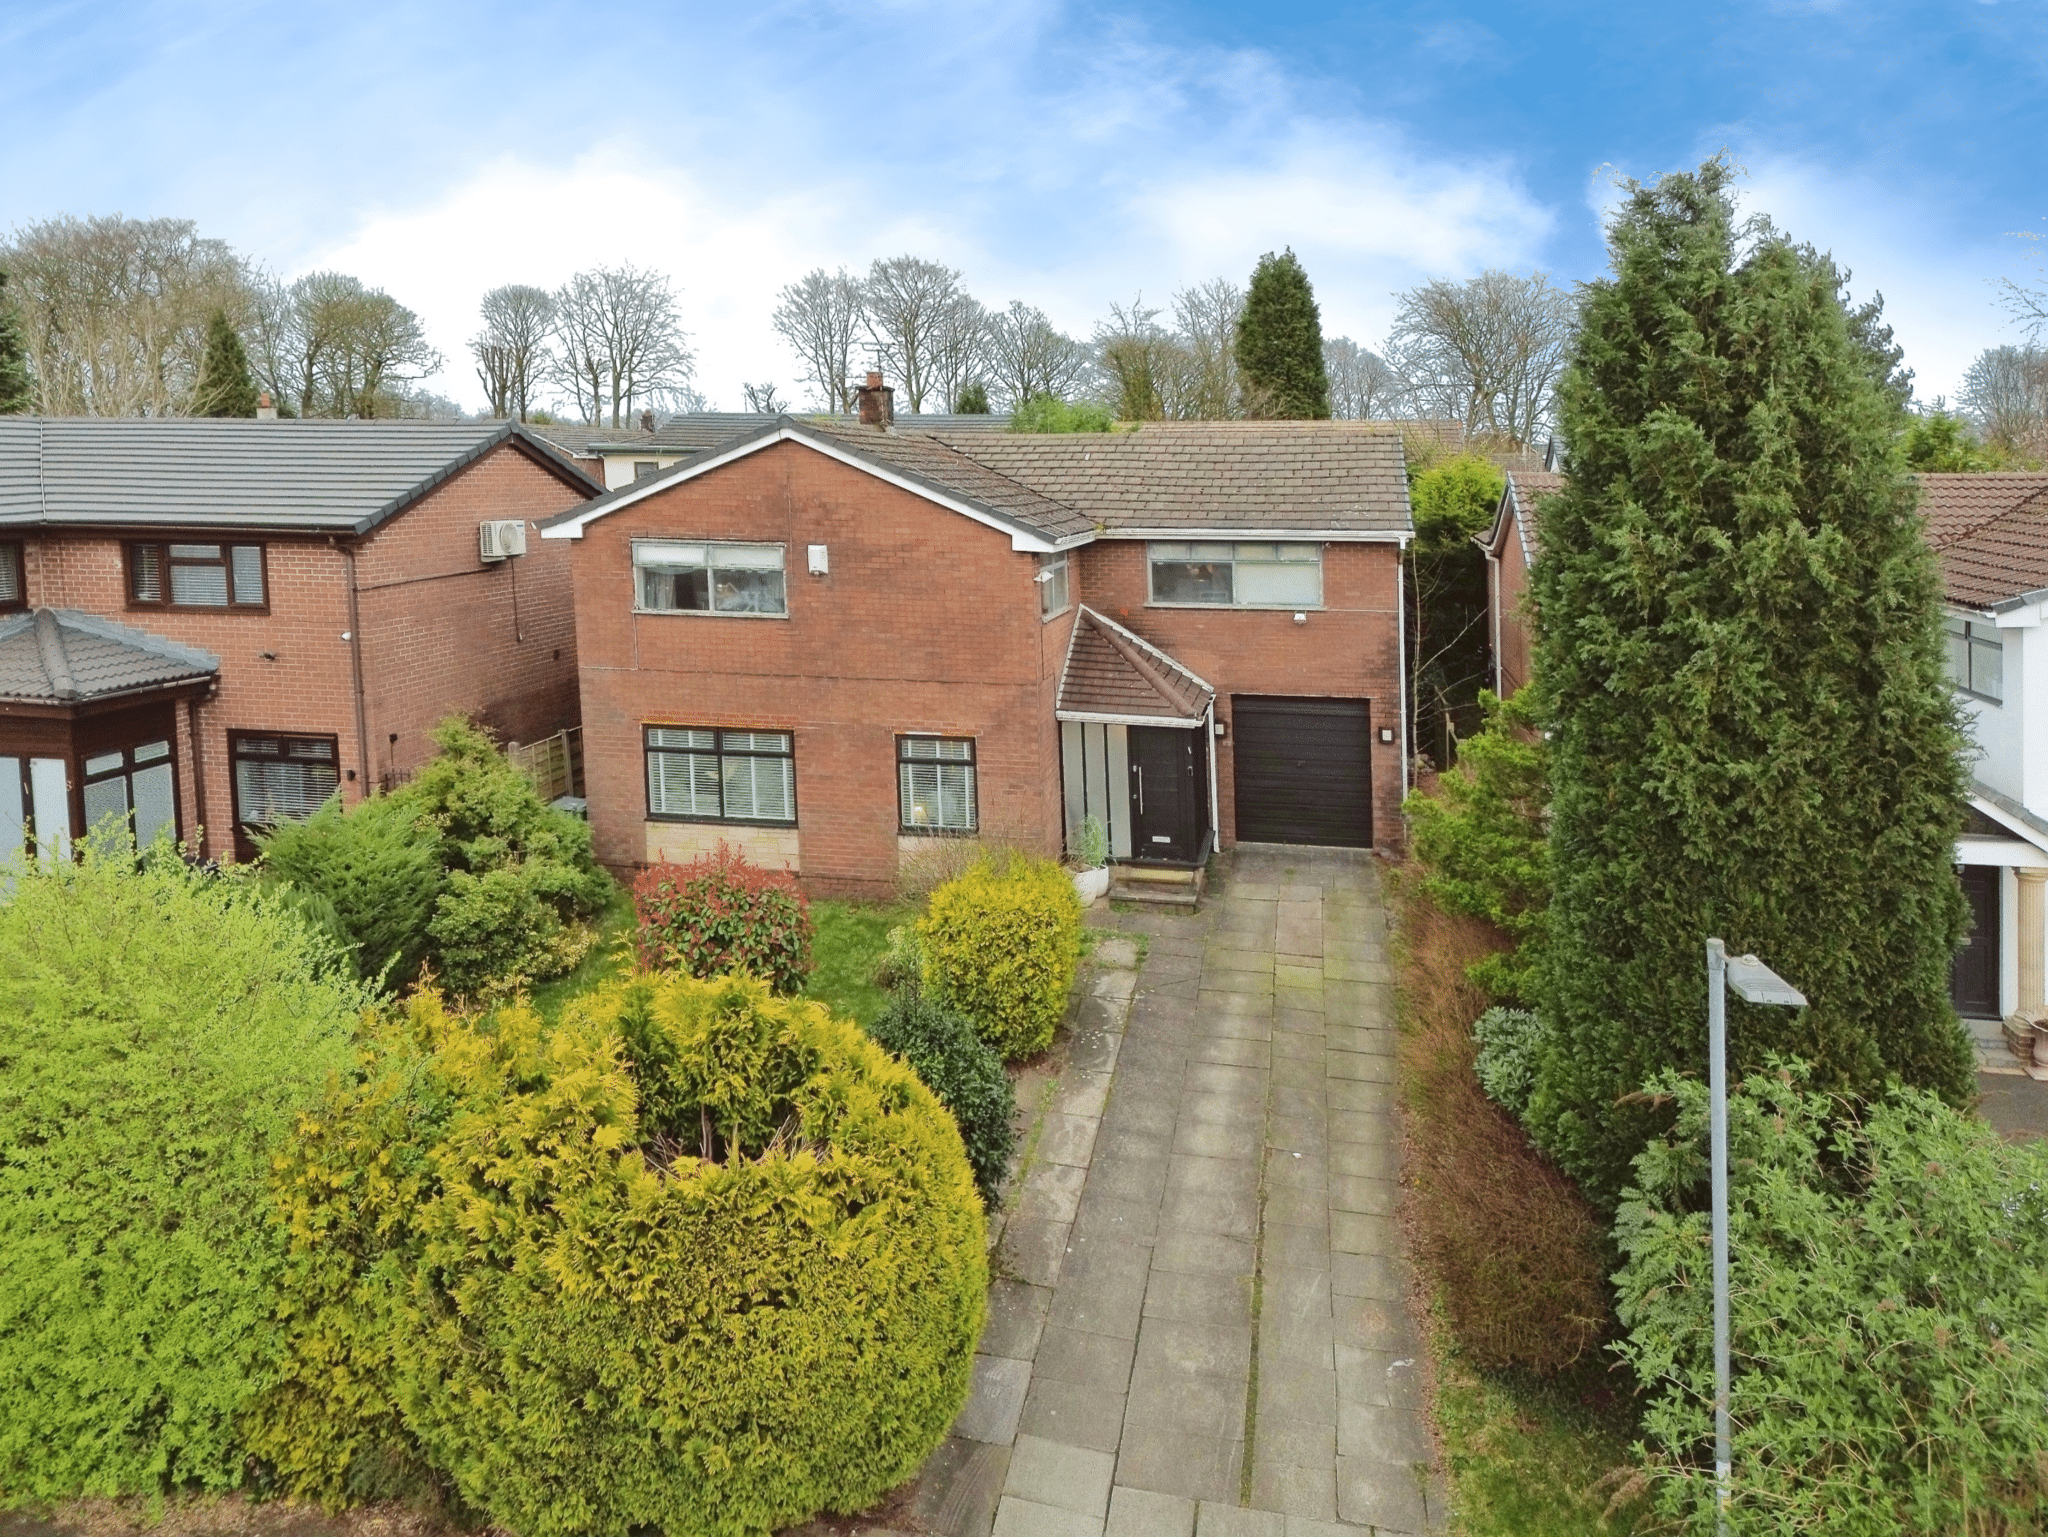 Kibworth Close, Whitefield, Manchester, Manchester, M45 7LS